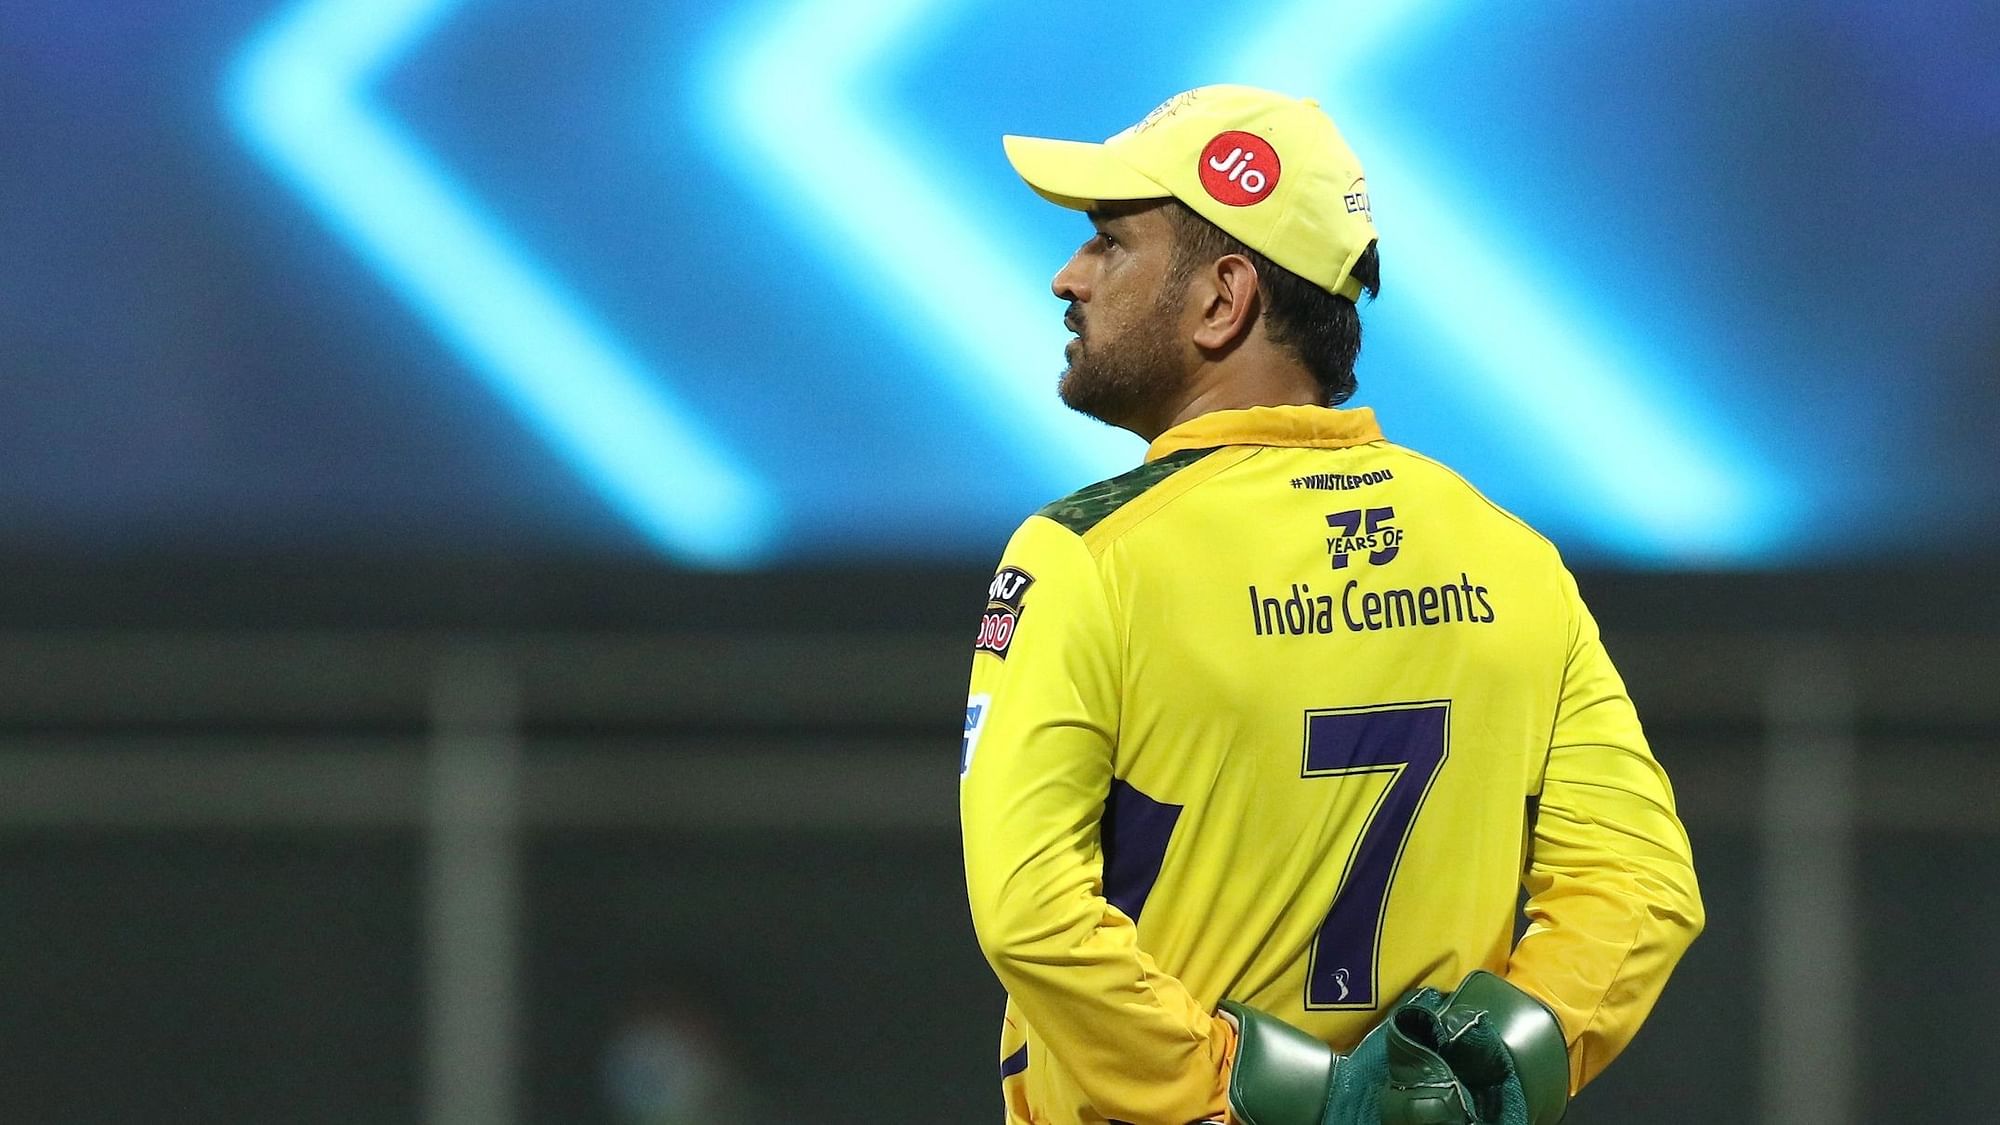 IPL 2023: CSK CEO Kasi Viswanathan Confirms MS Dhoni Will Lead 'Yellow Army' in 2023